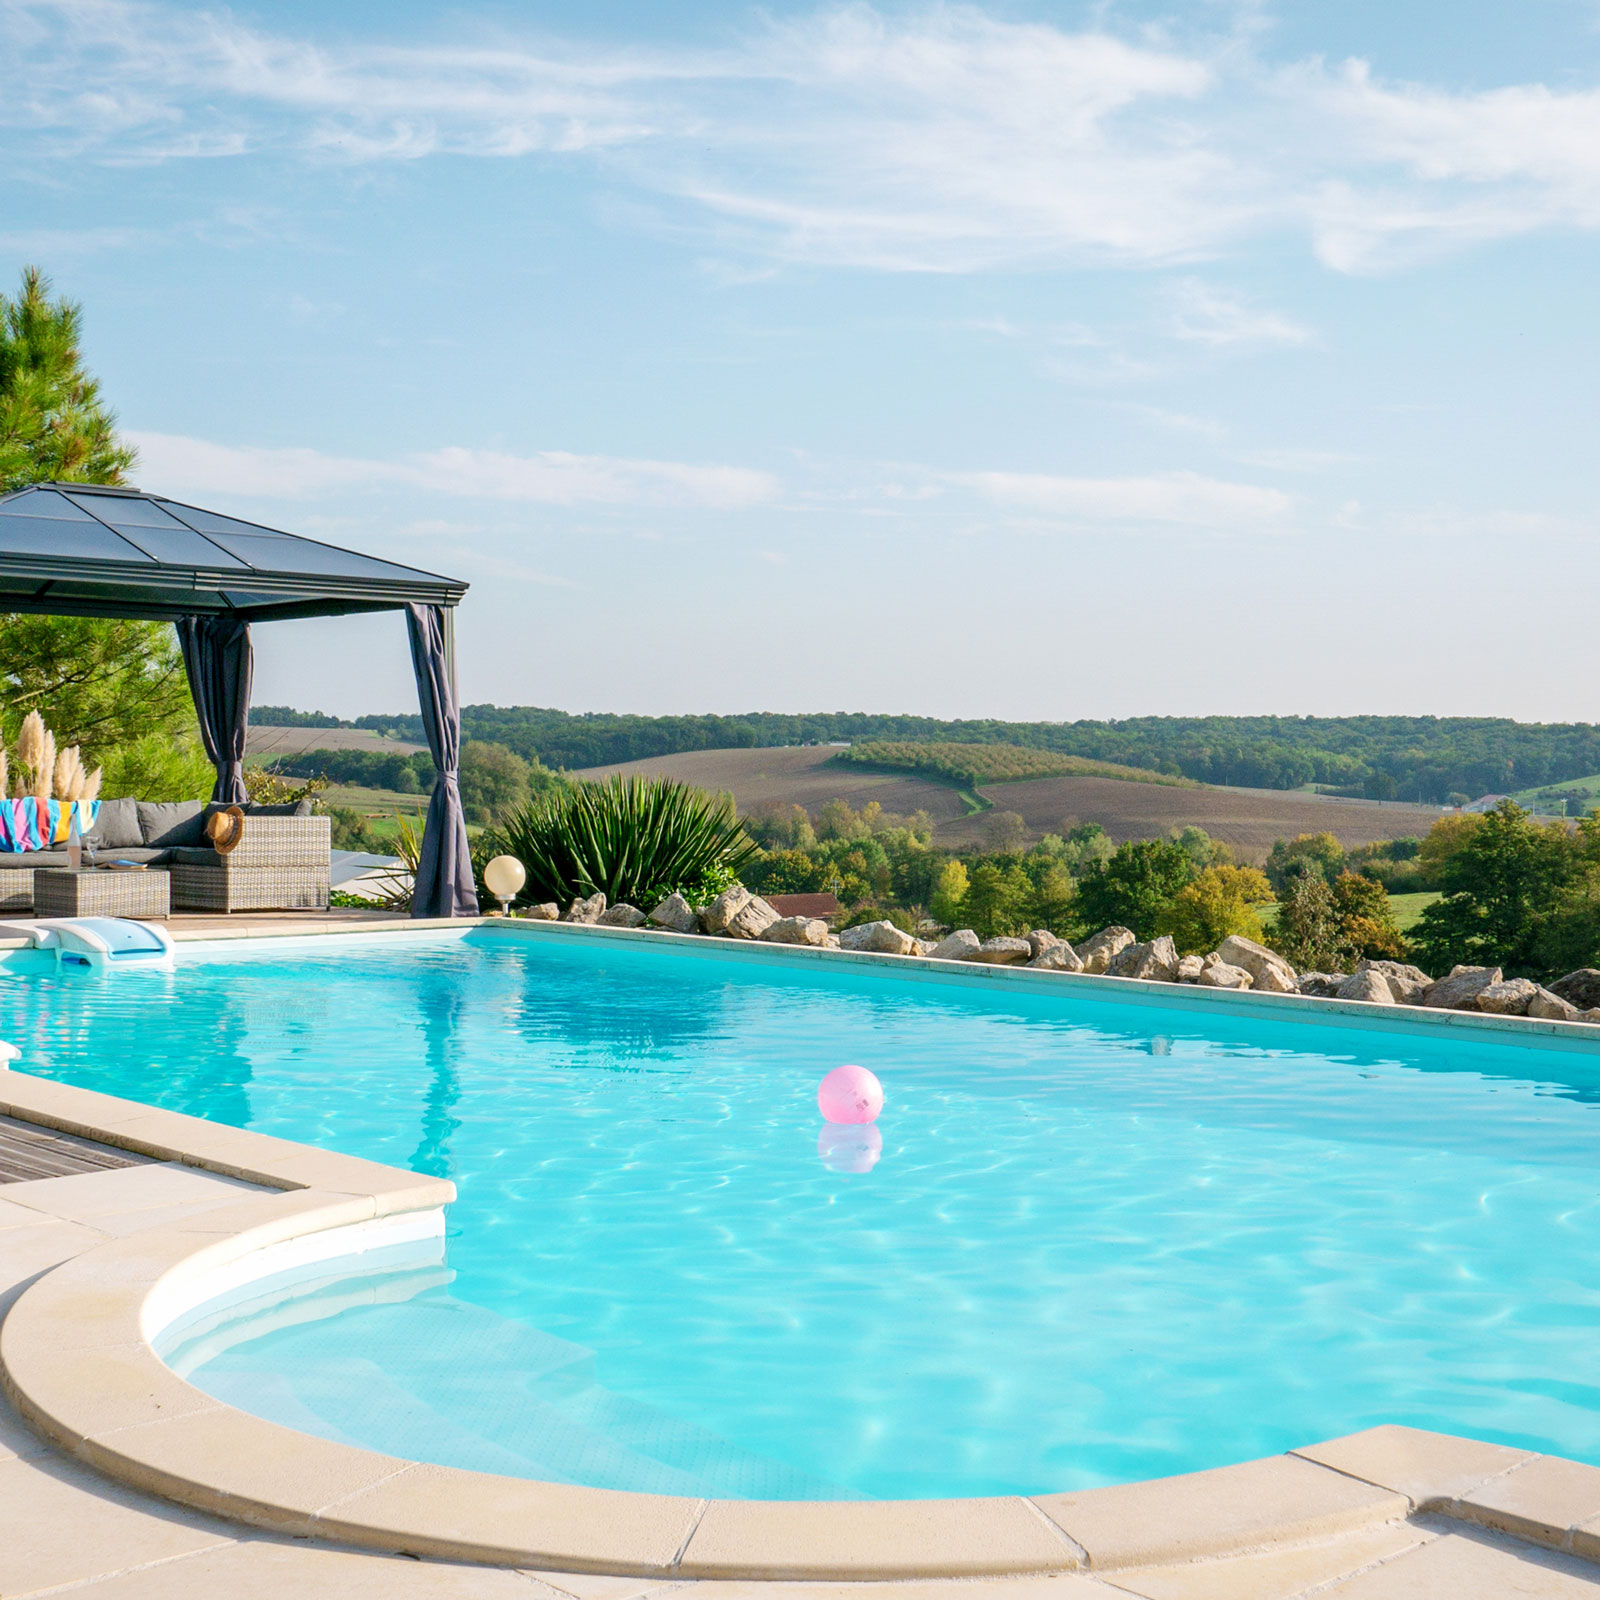 Les Hirondelles gite holiday villa South West France with a private pool.jpg